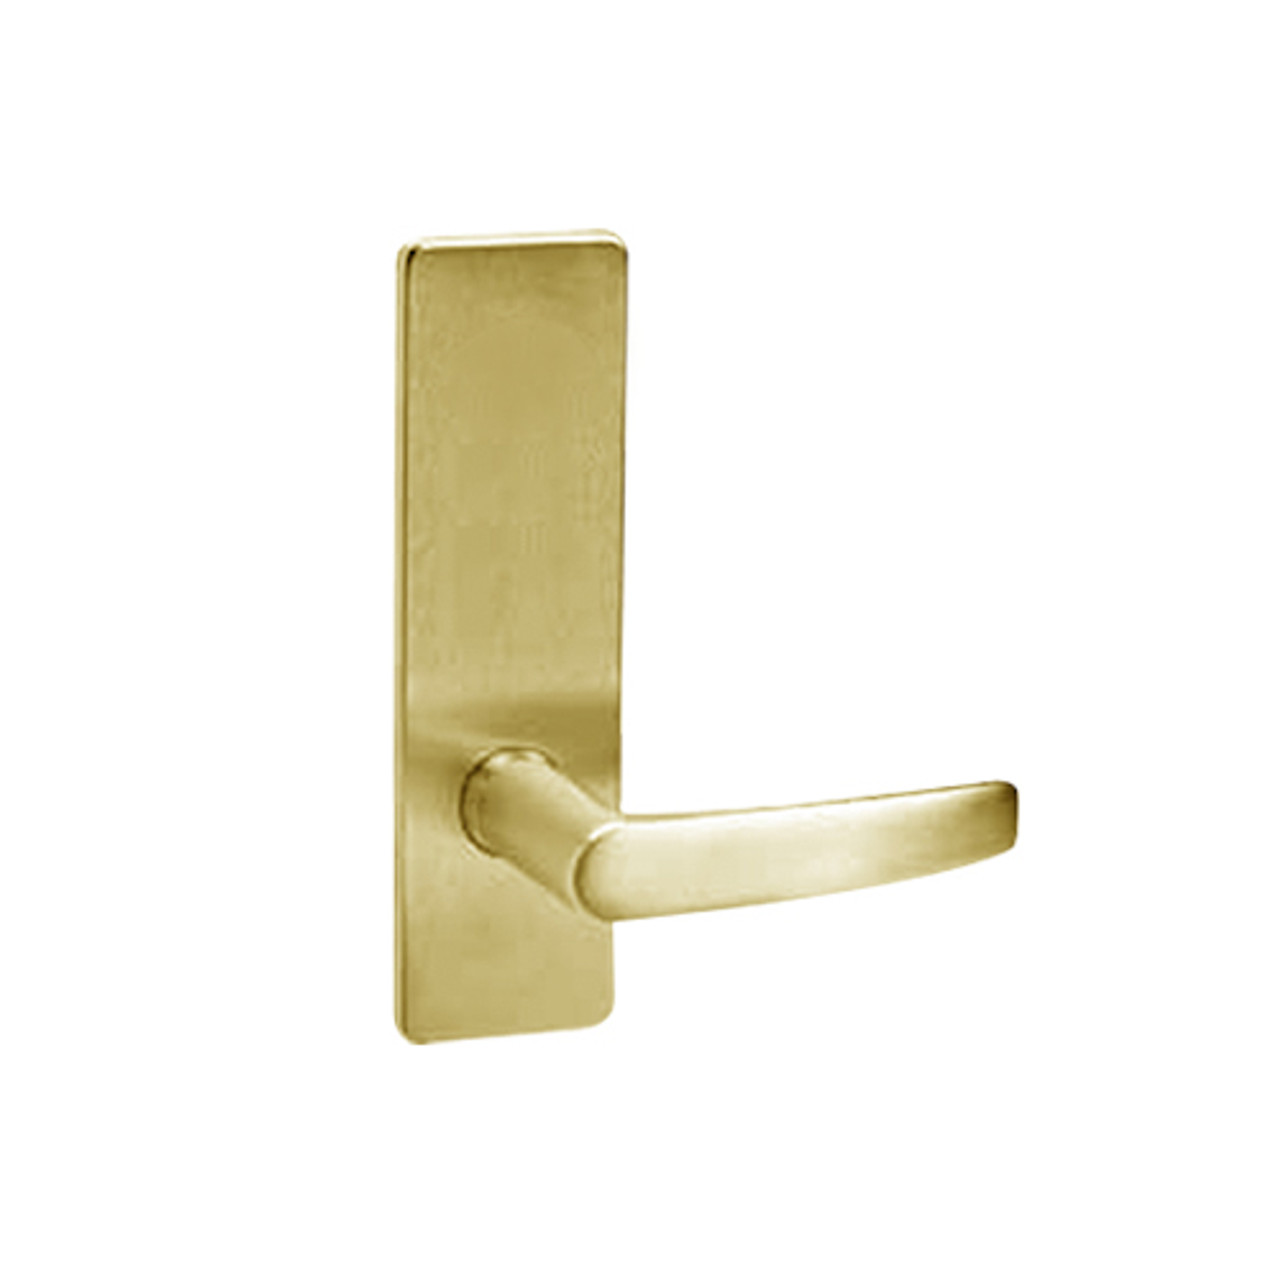 ML2020-ASP-605-M31 Corbin Russwin ML2000 Series Mortise Privacy Locksets with Armstrong Lever in Bright Brass